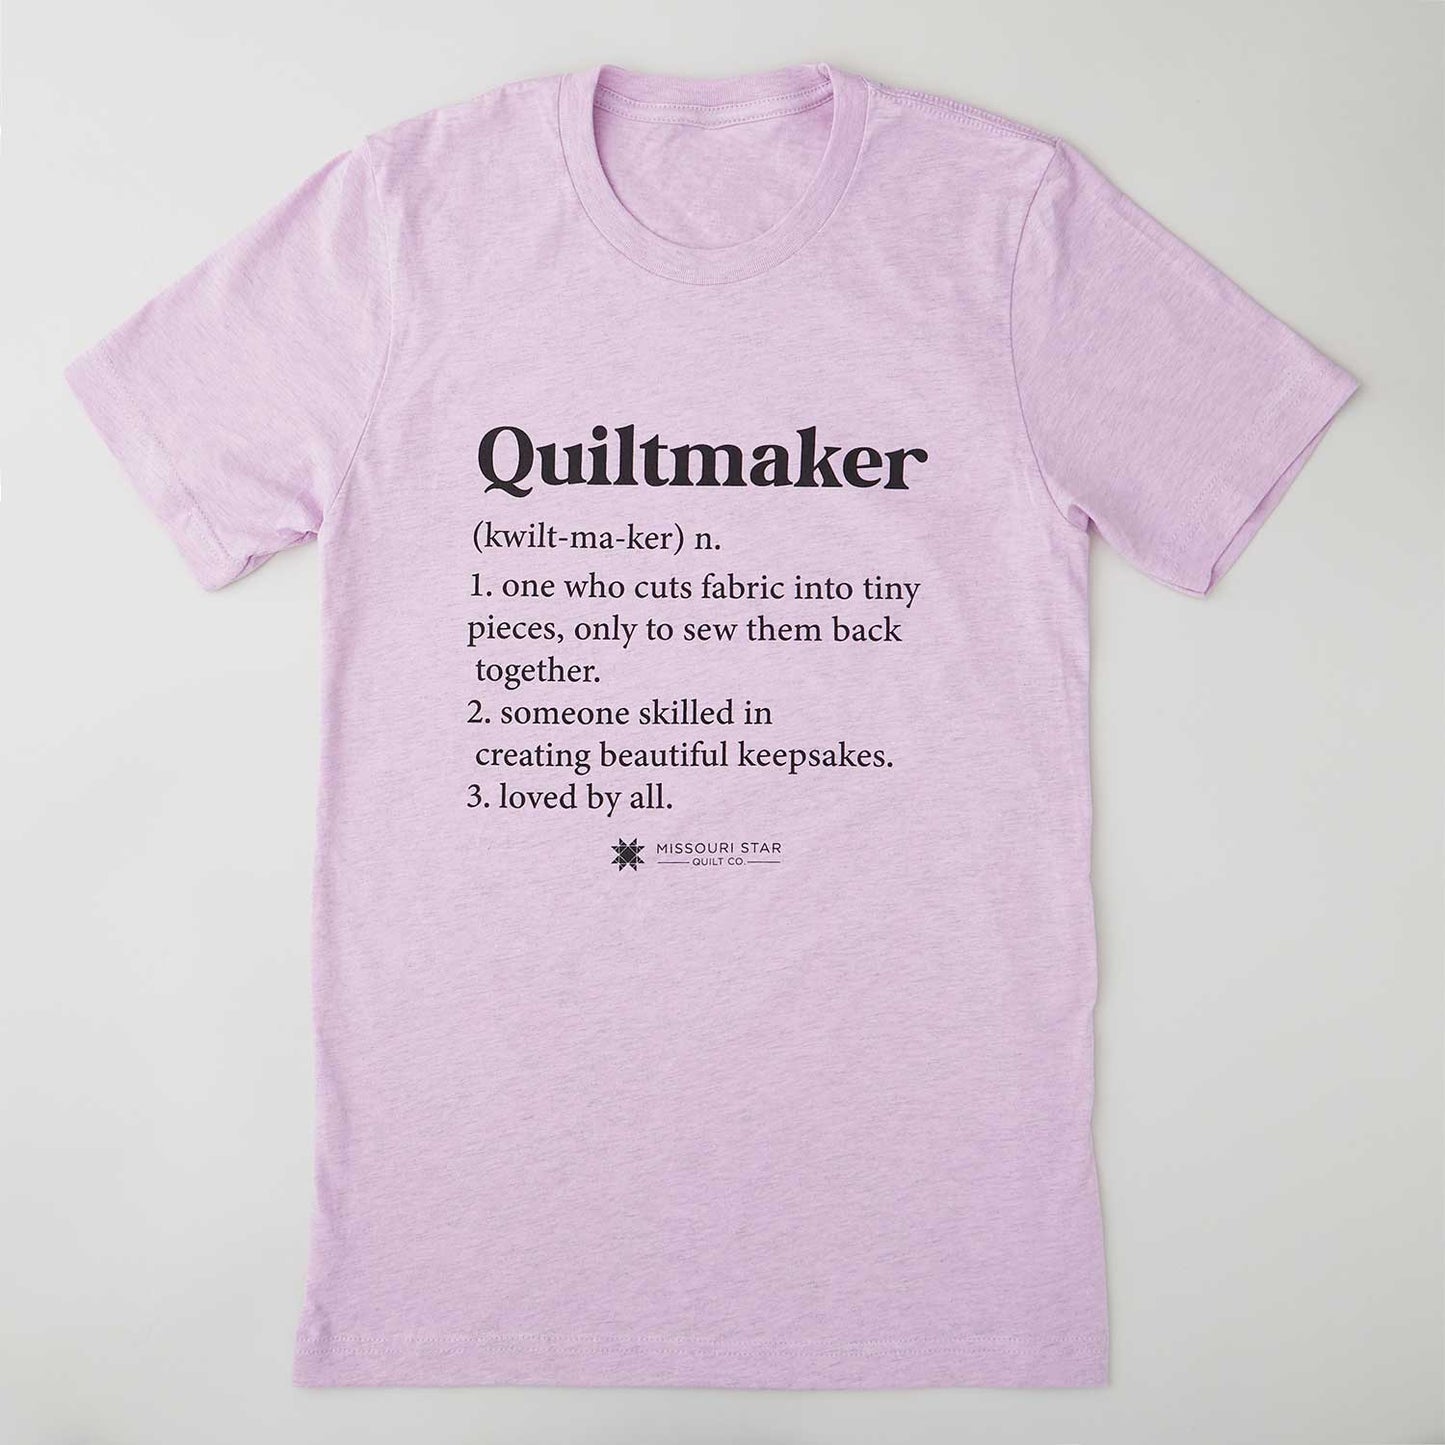 Quiltmaker T-shirt - Heather Prism Lilac - 3XL Primary Image